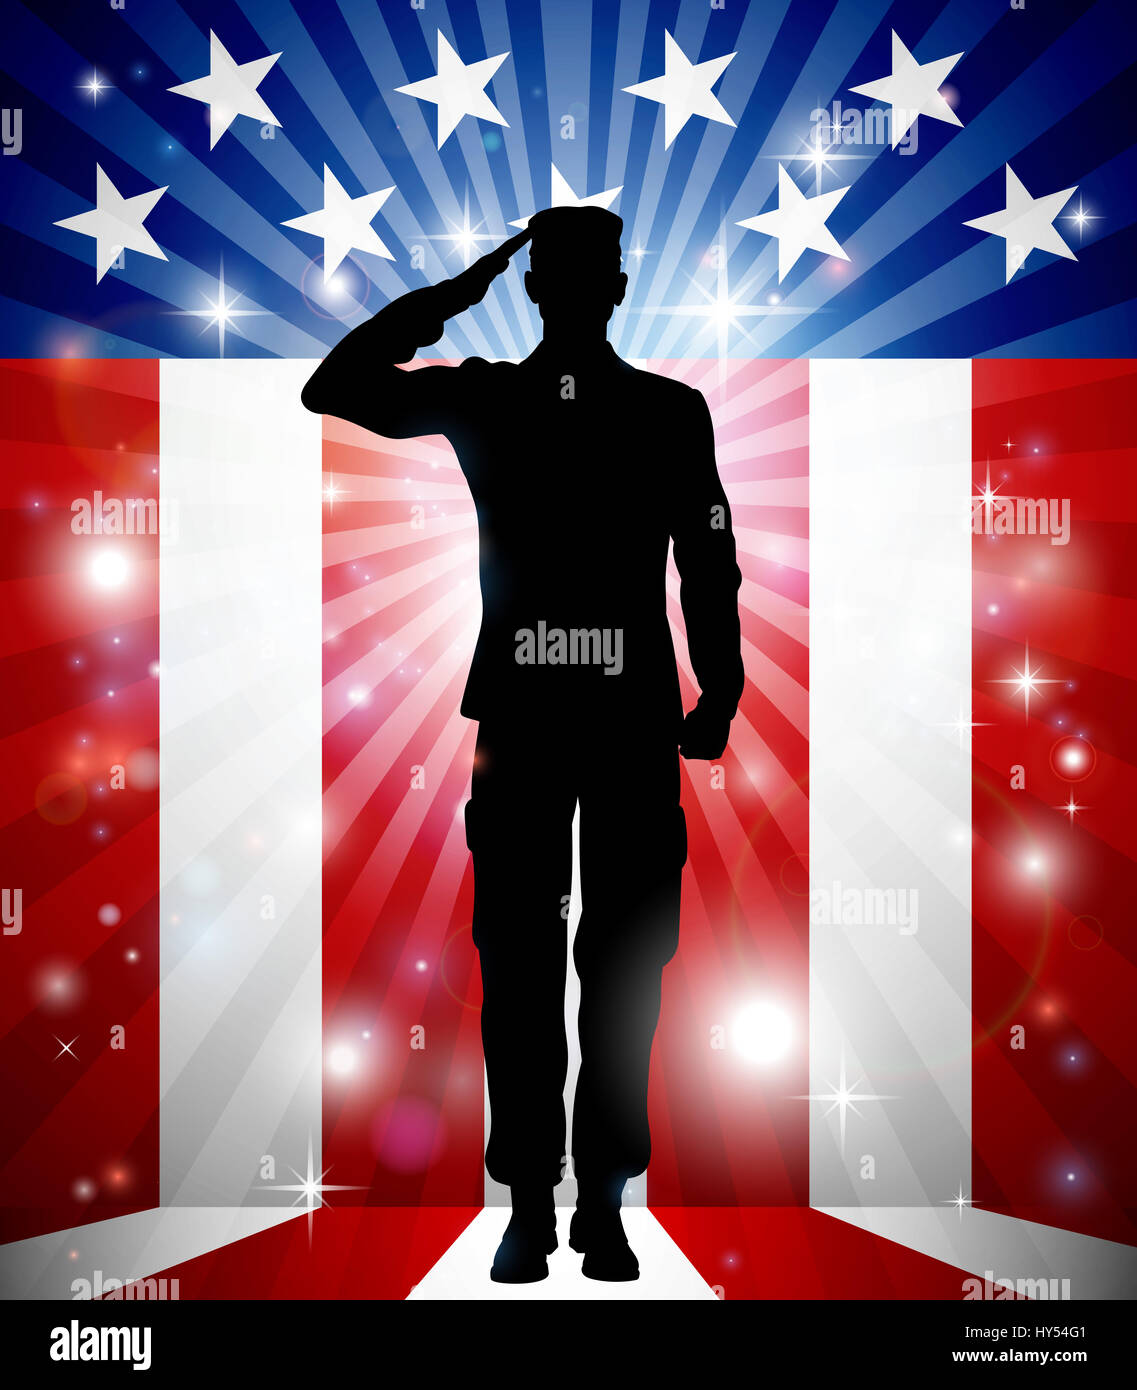 A US soldier saluting in front of an American flag background for Veterans Day Stock Photo